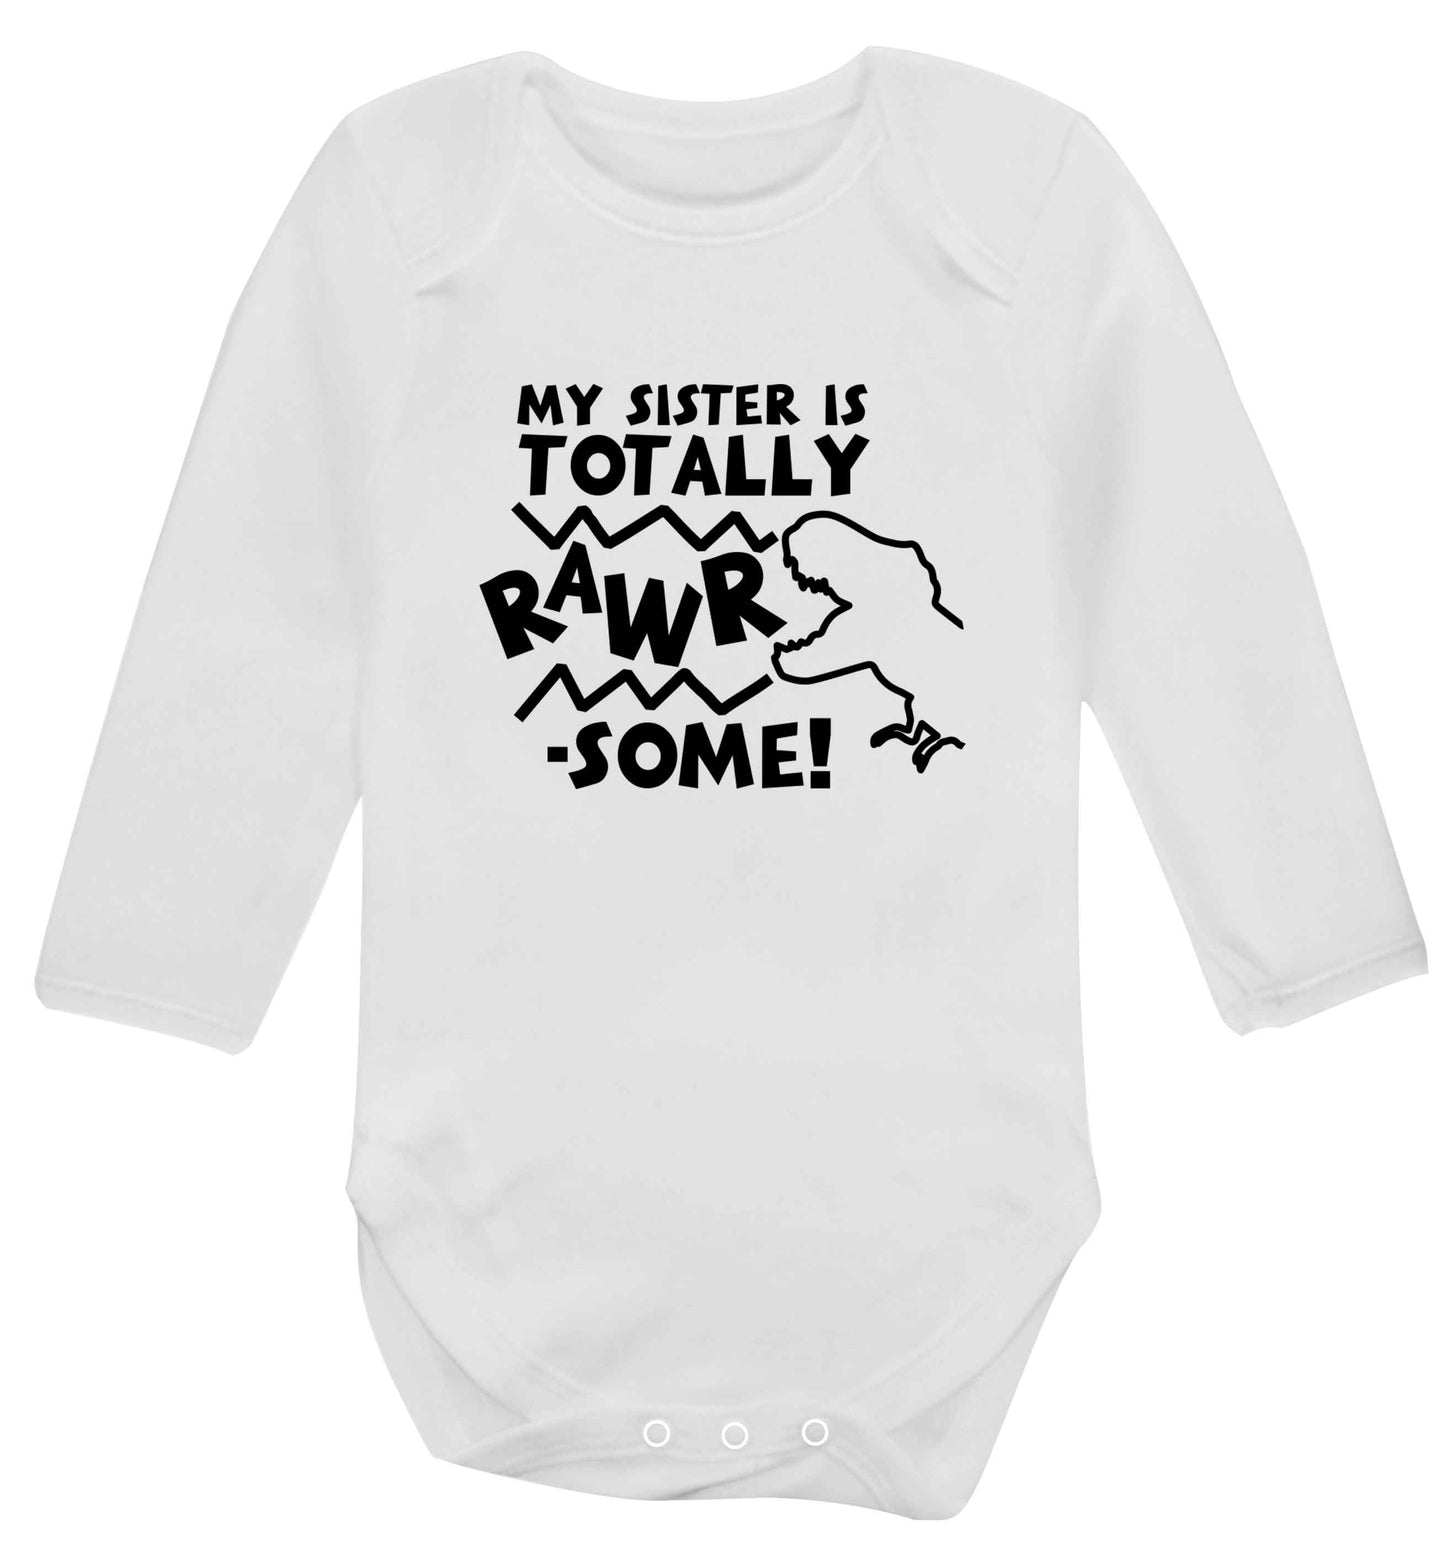 My sister is totally rawrsome baby vest long sleeved white 6-12 months